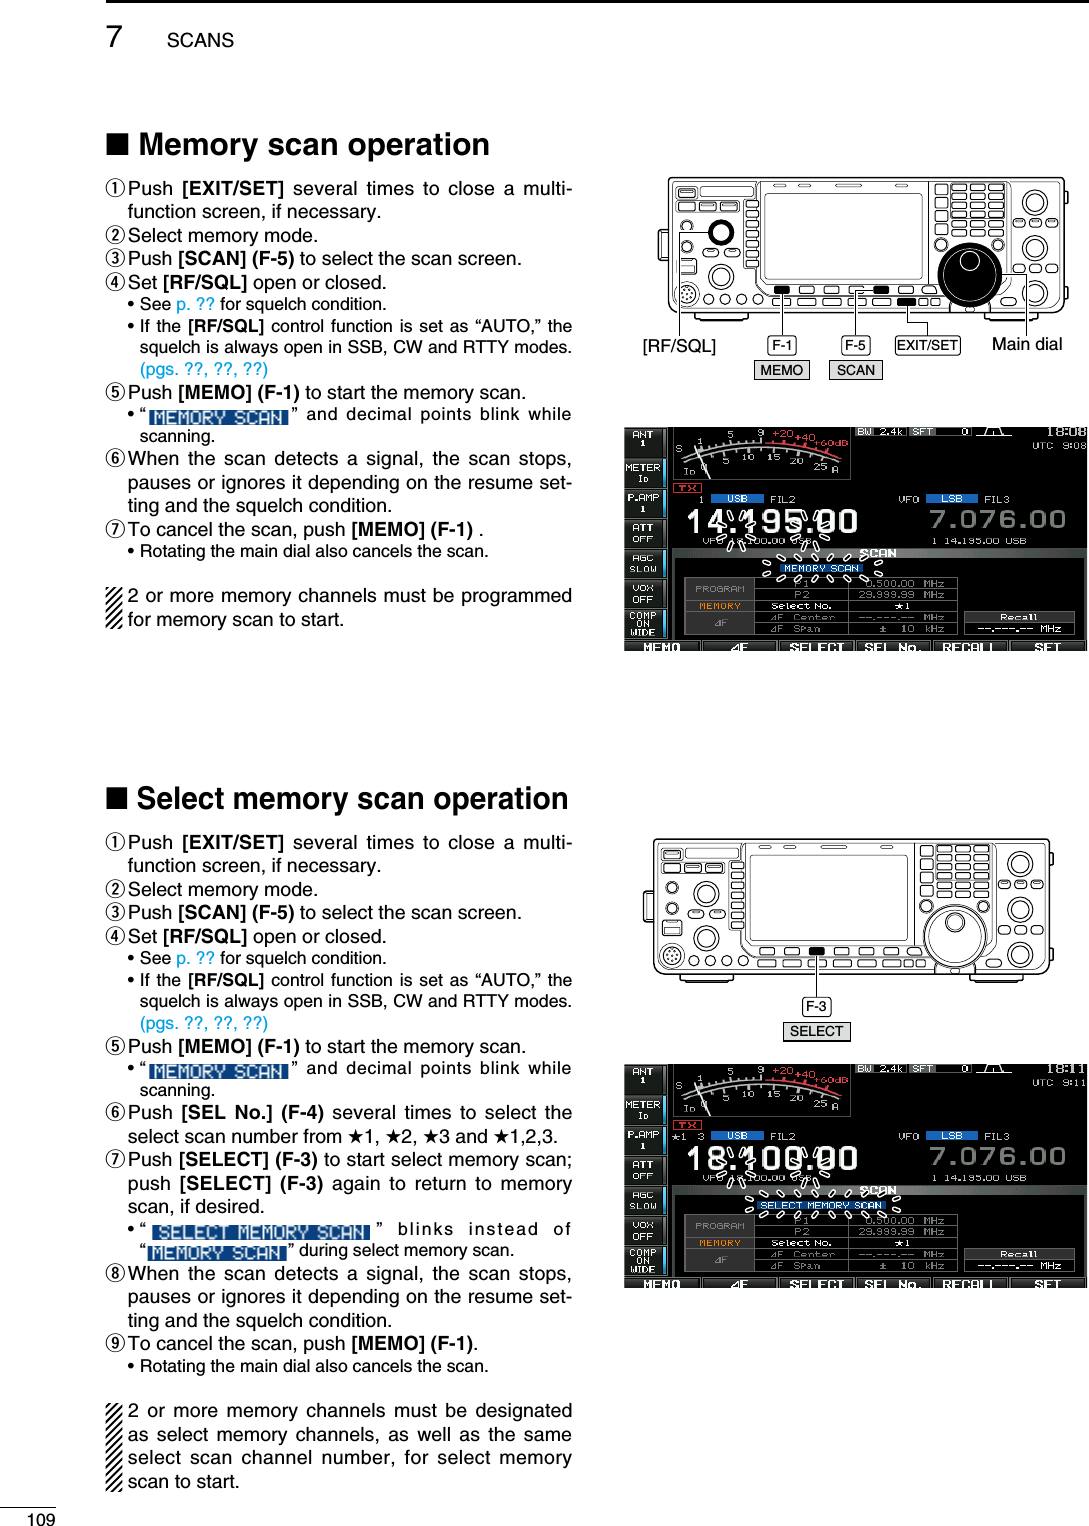 N Memory scan operationq  Push  [EXIT/SET] several times to close a multi-function screen, if necessary.w Select memory mode.e Push  [SCAN] (F-5) to select the scan screen.r Set  [RF/SQL] open or closed. • See p. ?? for squelch condition. •  If the [RF/SQL] control function is set as “AUTO,” the squelch is always open in SSB, CW and RTTY modes. (pgs. ??, ??, ??)t Push  [MEMO] (F-1) to start the memory scan. •  “    ” and decimal points blink while scanning.y  When the scan detects a signal, the scan stops, pauses or ignores it depending on the resume set-ting and the squelch condition.u To cancel the scan, push [MEMO] (F-1) .  • Rotating the main dial also cancels the scan.2 or more memory channels must be programmed for memory scan to start.N Select memory scan operationq  Push  [EXIT/SET] several times to close a multi-function screen, if necessary.w Select memory mode.e Push  [SCAN] (F-5) to select the scan screen.r Set  [RF/SQL] open or closed. • See p. ?? for squelch condition. •  If the [RF/SQL] control function is set as “AUTO,” the squelch is always open in SSB, CW and RTTY modes. (pgs. ??, ??, ??)t Push  [MEMO] (F-1) to start the memory scan. •  “    ” and decimal points blink while scanning.y  Push  [SEL No.] (F-4) several times to select the select scan number from (1, (2, (3 and (1,2,3.u  Push [SELECT] (F-3) to start select memory scan; push  [SELECT] (F-3) again to return to memory scan, if desired. •  “    ” blinks instead of  “   ” during select memory scan.i  When the scan detects a signal, the scan stops, pauses or ignores it depending on the resume set-ting and the squelch condition.o To cancel the scan, push [MEMO] (F-1).  • Rotating the main dial also cancels the scan.2 or more memory channels must be designated as select memory channels, as well as the same select scan channel number, for select memory scan to start.F-1 F-5 EXIT/SET Main dial[RF/SQL]SCANMEMOF-3SELECT1097SCANS